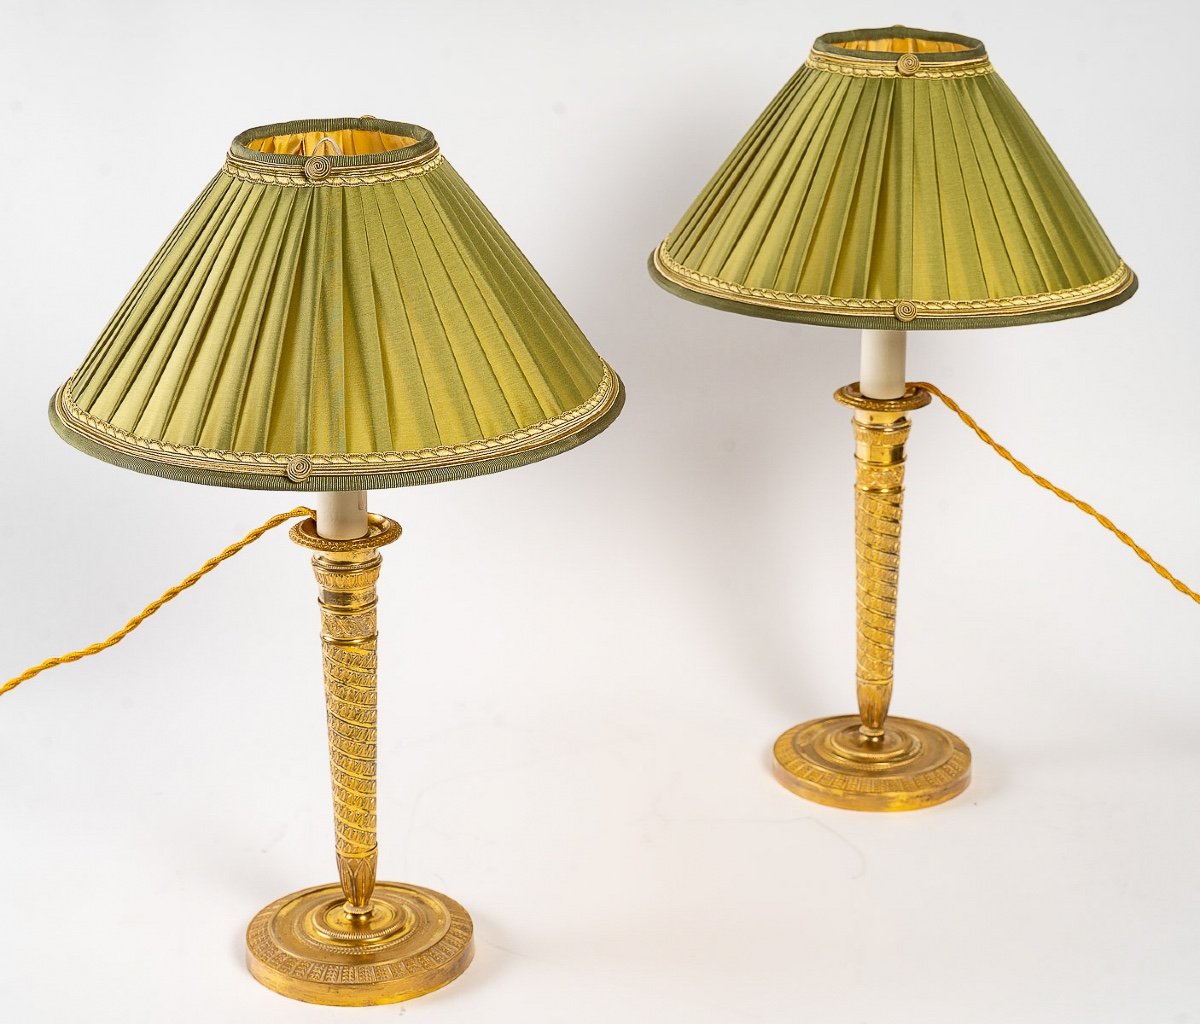 Pair Of Candlesticks In Gilt Bronze Lamps Decorated With Heart Raises From The Directoire Period-photo-6